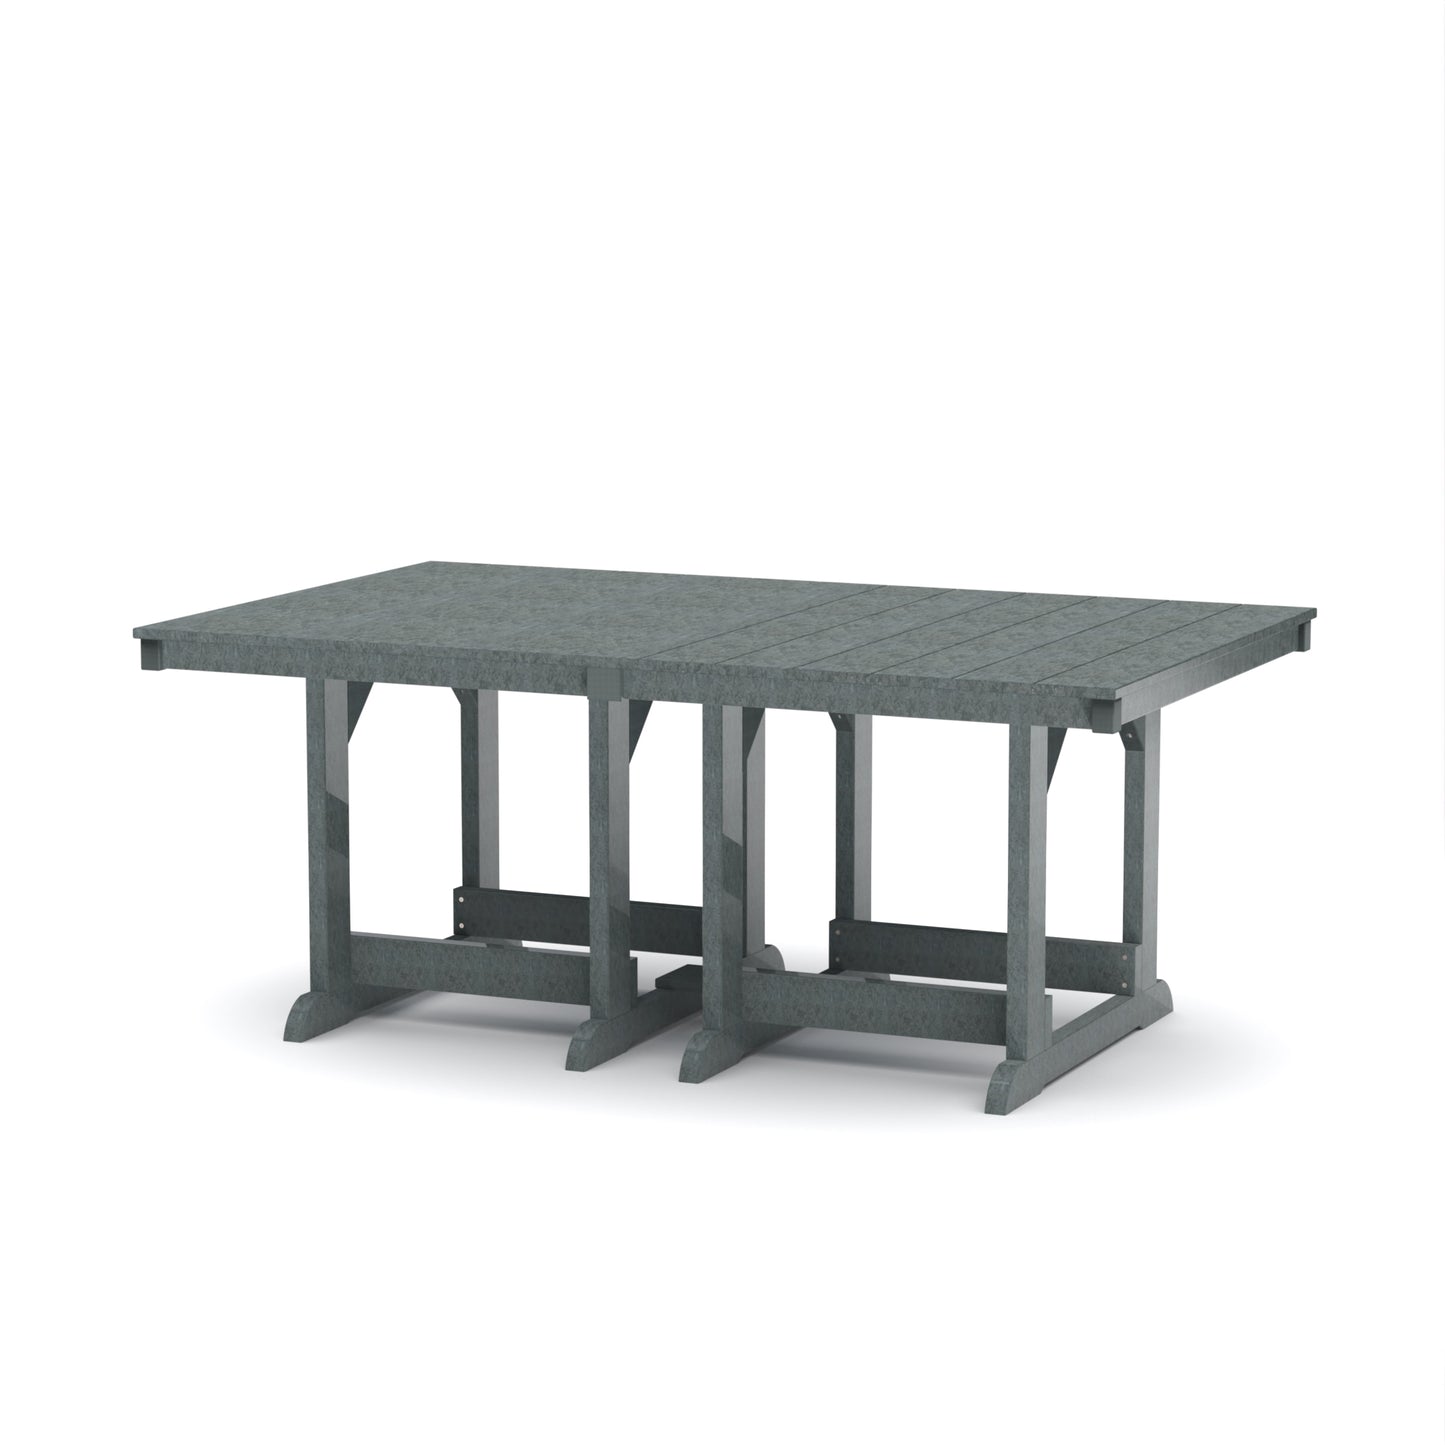 Wildridge Outdoor Recycled Plastic Heritage Table 44" x 72" - LEAD TIME TO SHIP 4 WEEKS